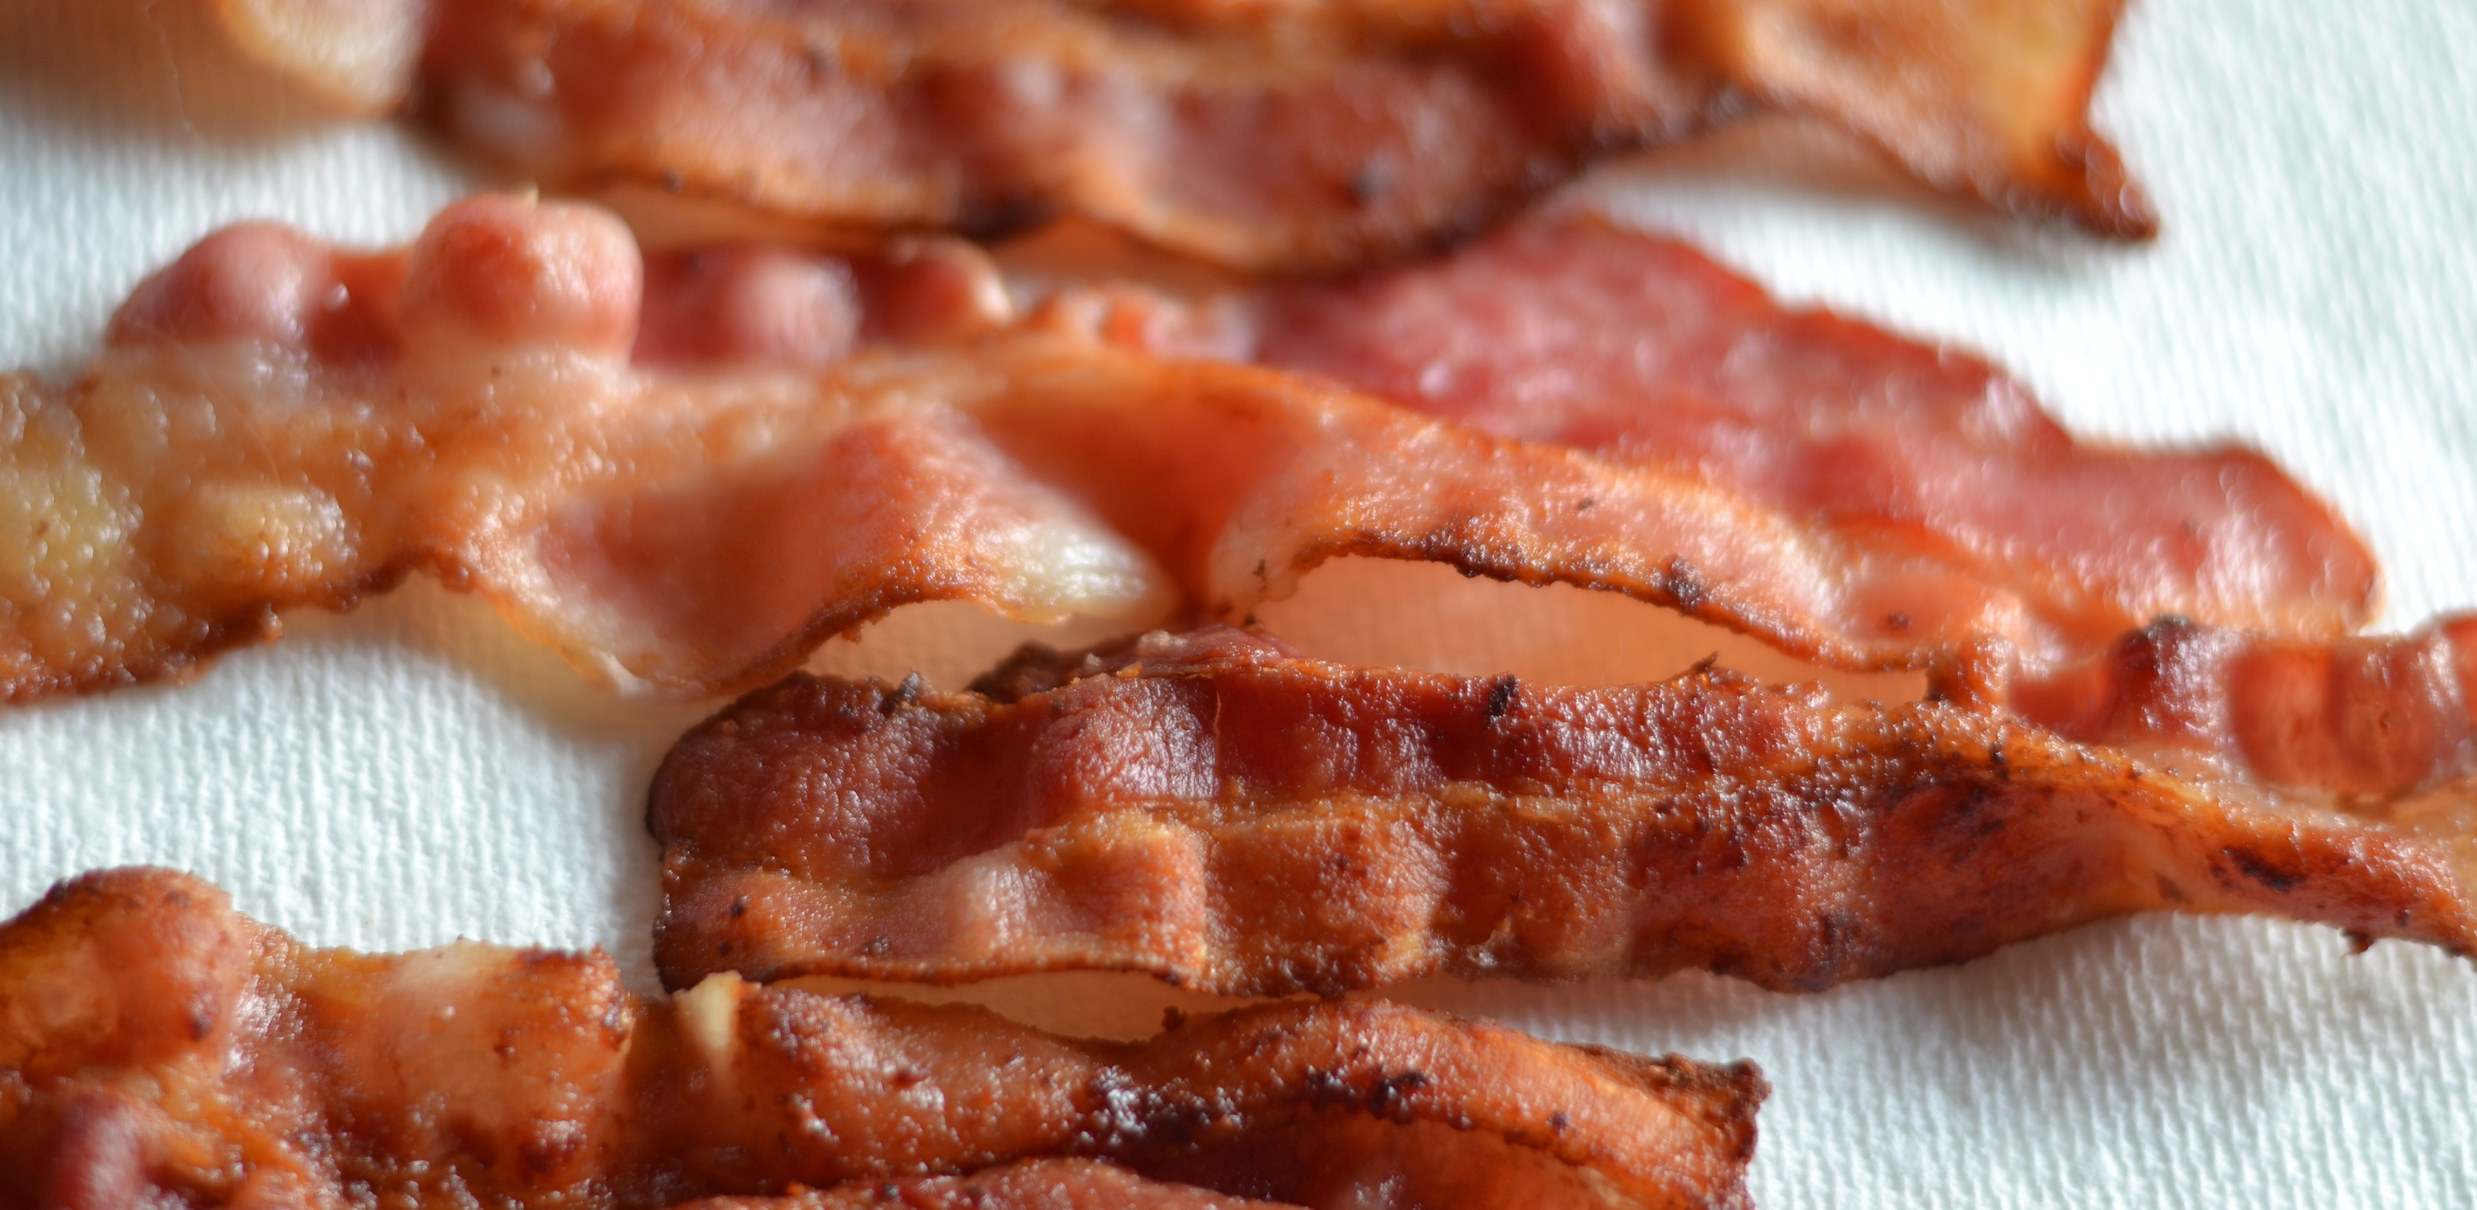 Bacon on paper towel.